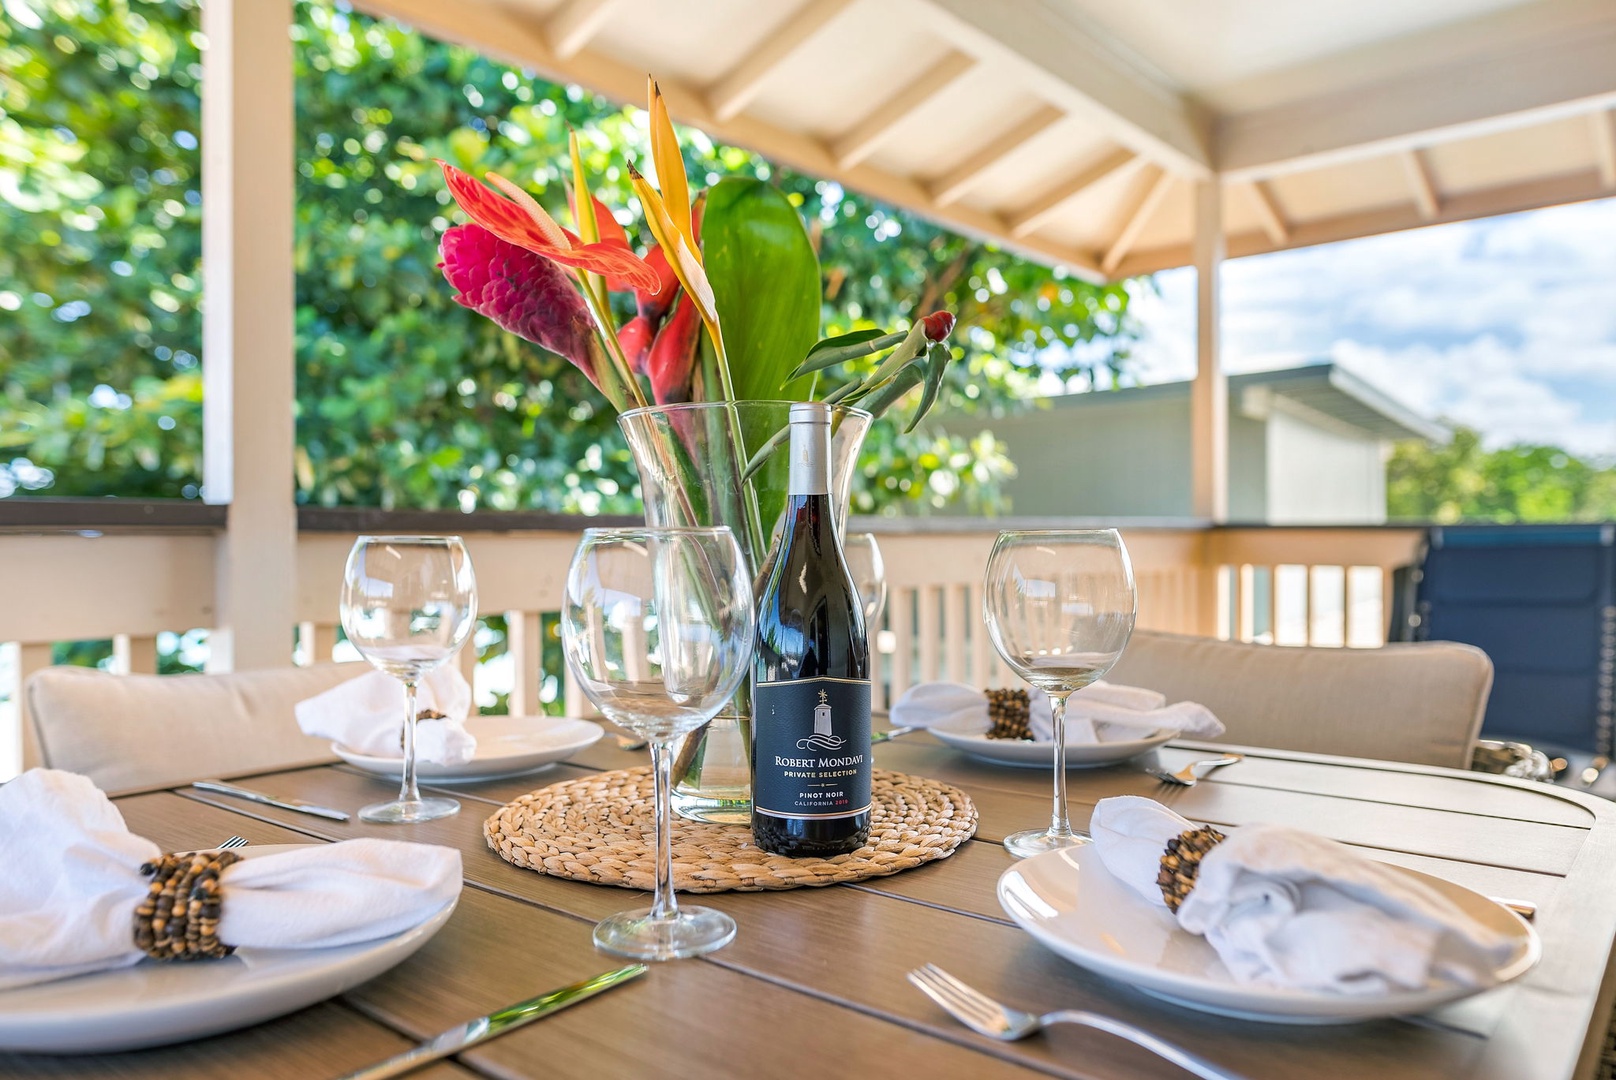 Haleiwa Vacation Rentals, Pikai Hale - Enjoy a rich glass of wine and an island-inspired meal with a gentle ocean breeze